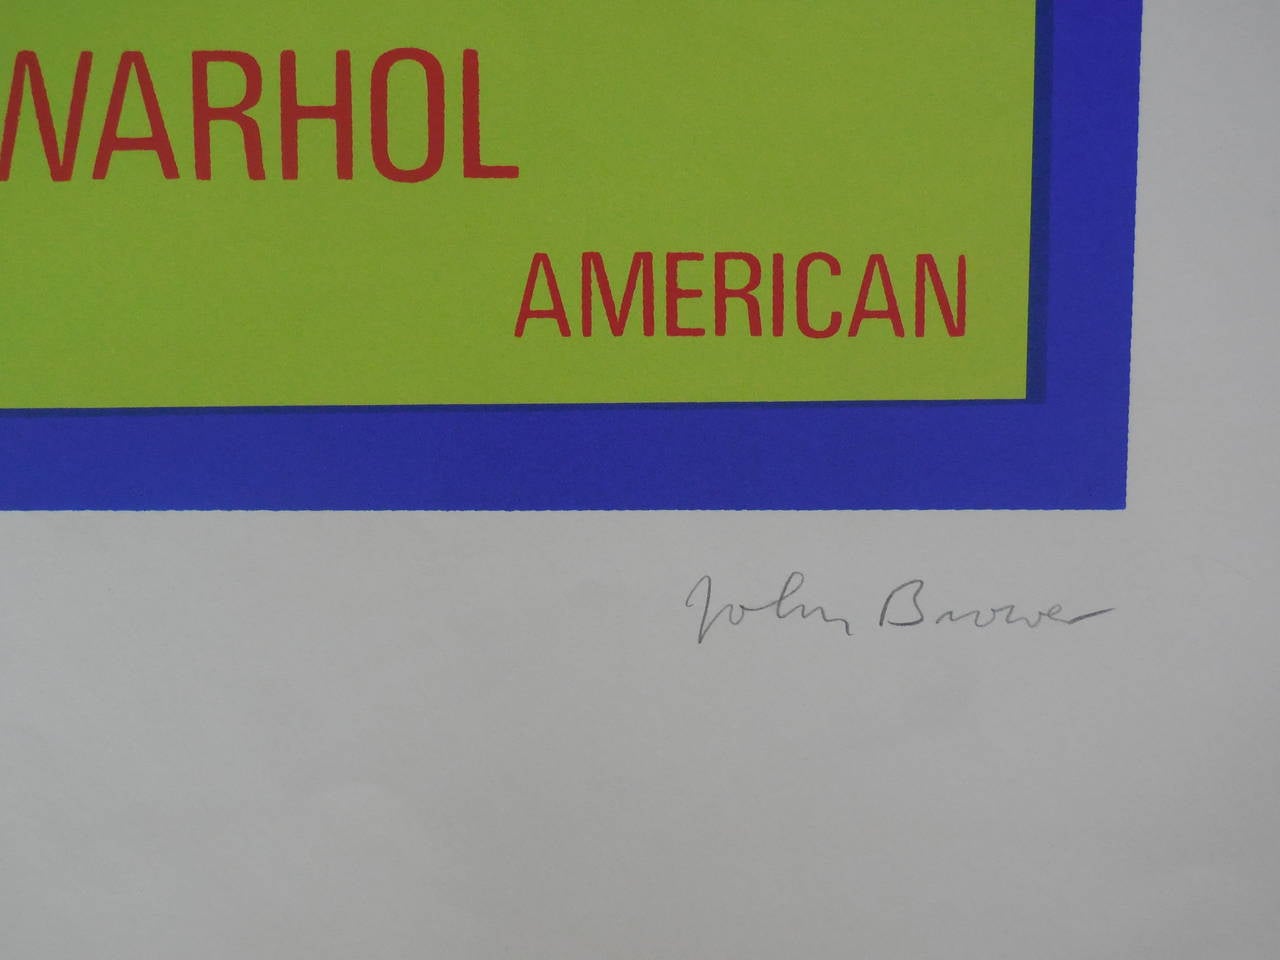 This is for a Photo Silkscreen Serigraph it is Titled Andy Warhol :Pop Artist American. light creasing to paper outside of image

John Brower worked in Chicago as a billboard designer for 12 years. He taught art at Alverno College of Milwaukee,